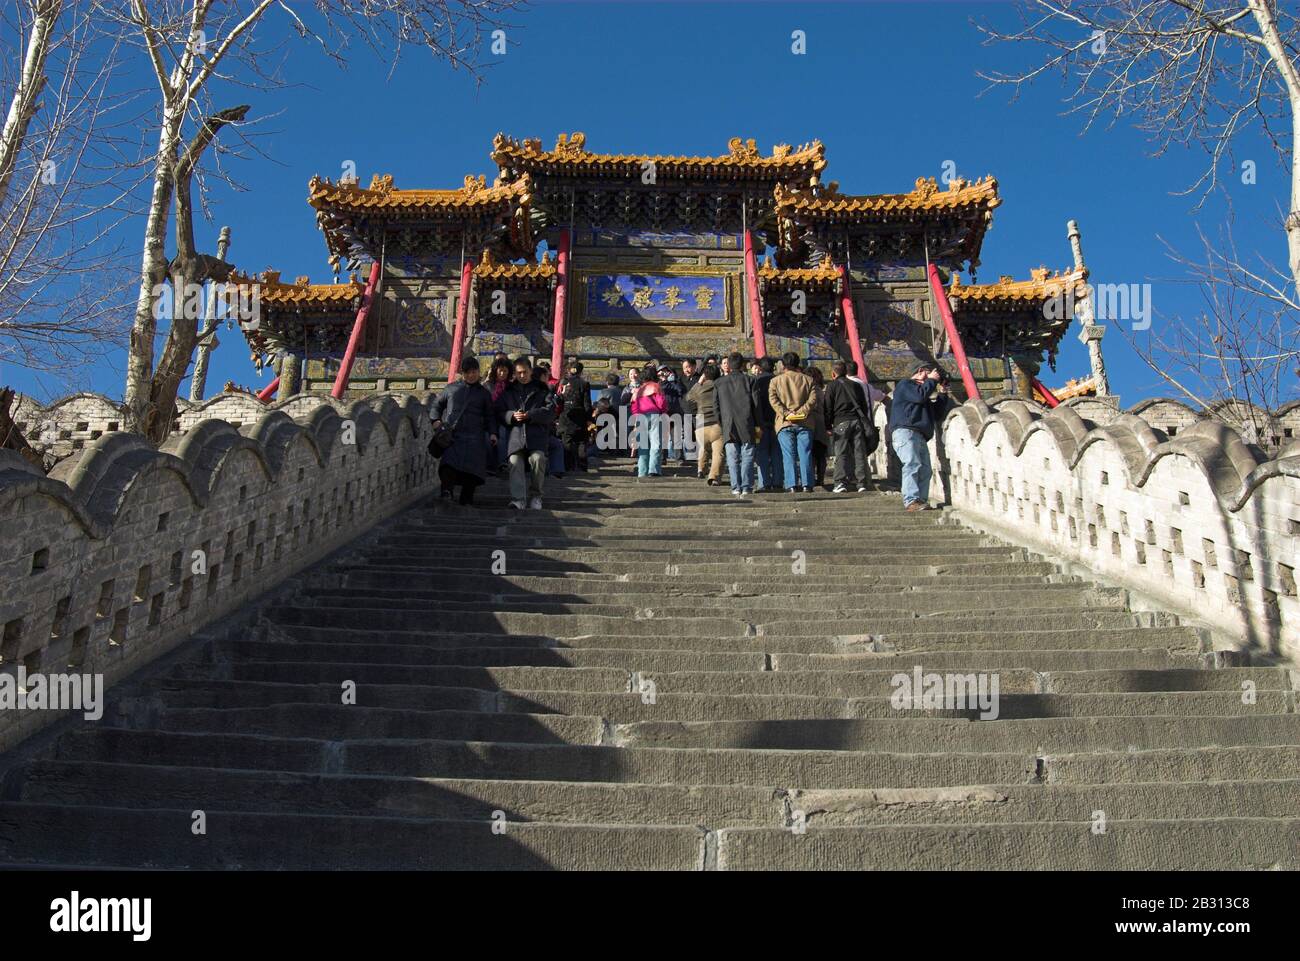 Descending the stairs from Pusading Temple, Wutaishan, Shanxi Province, China Stock Photo